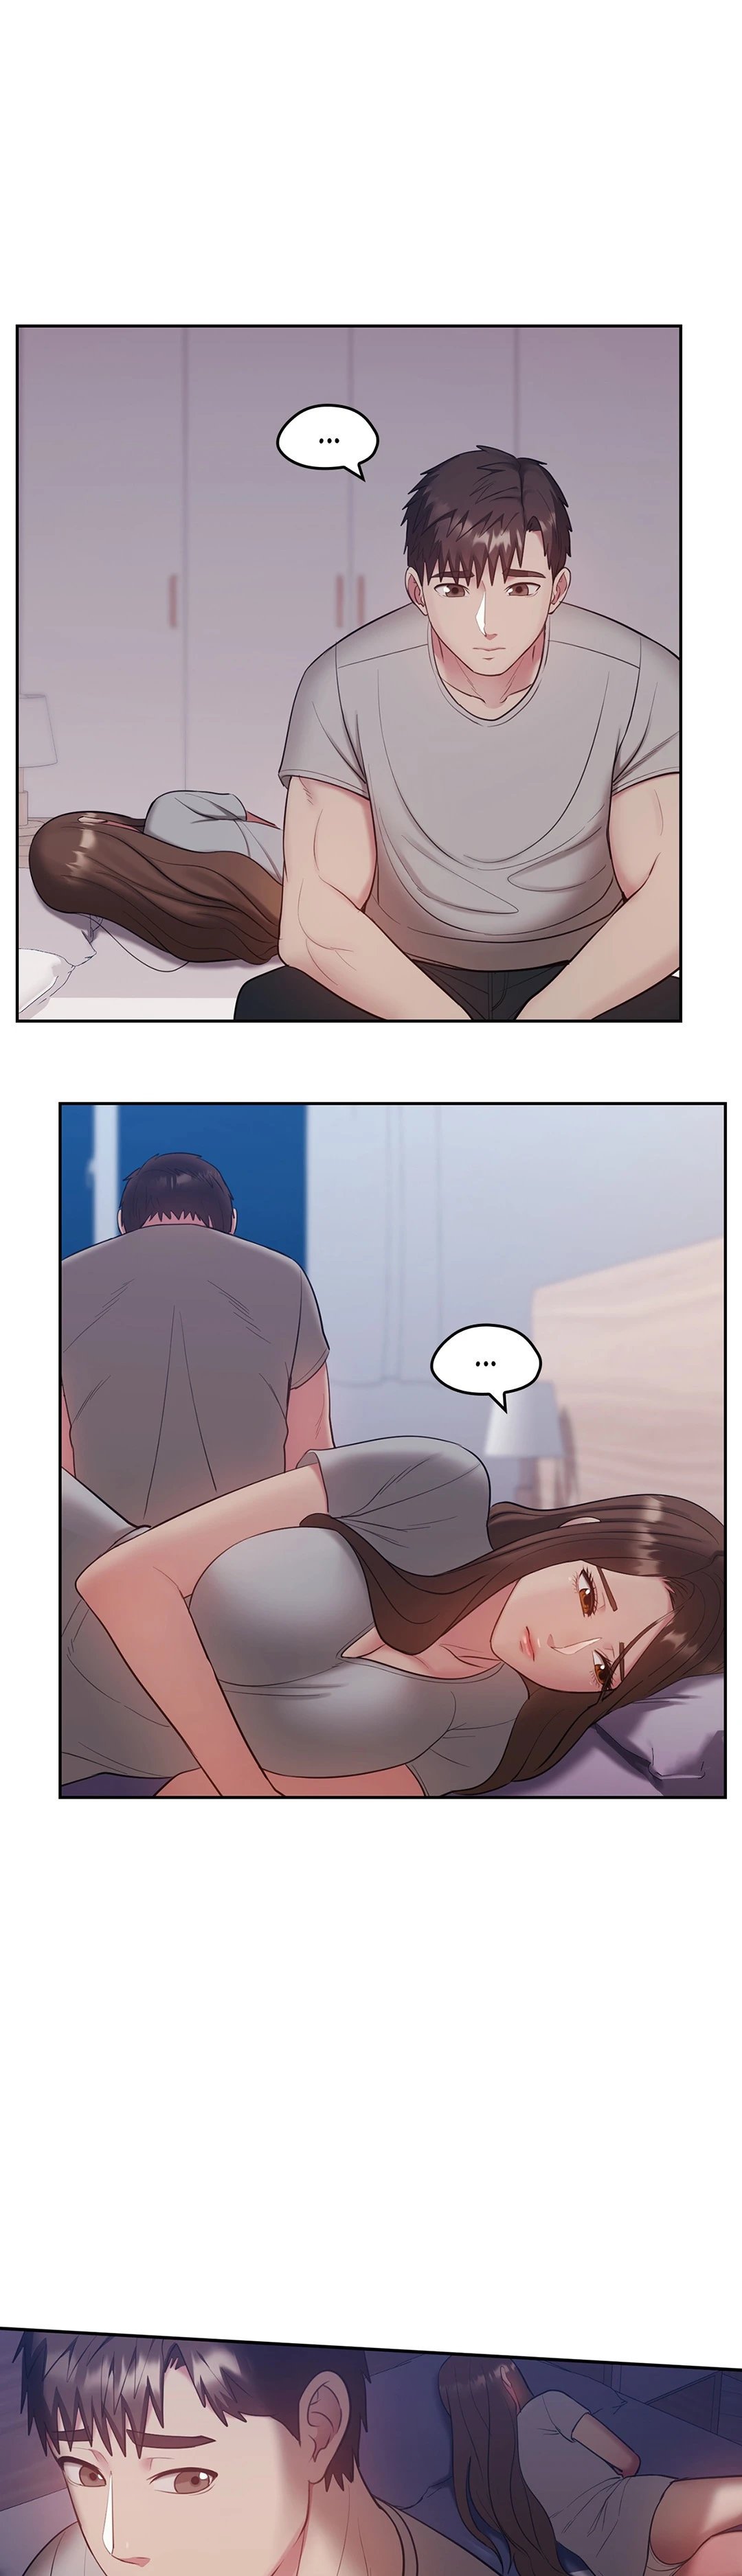 sexual-consulting-chap-33-17